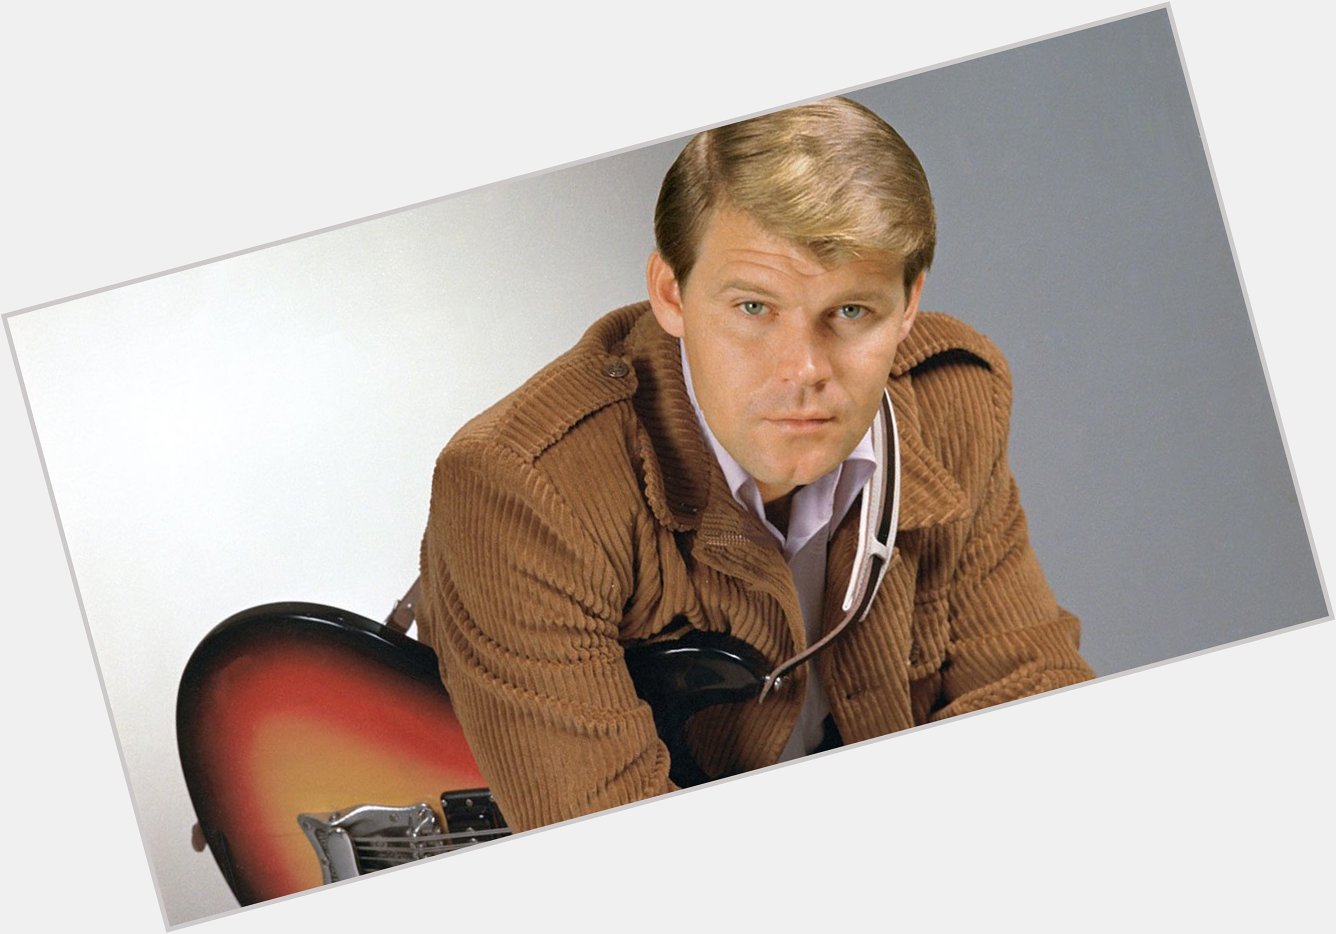 Happy Birthday, Glen Campbell! You are missed! 